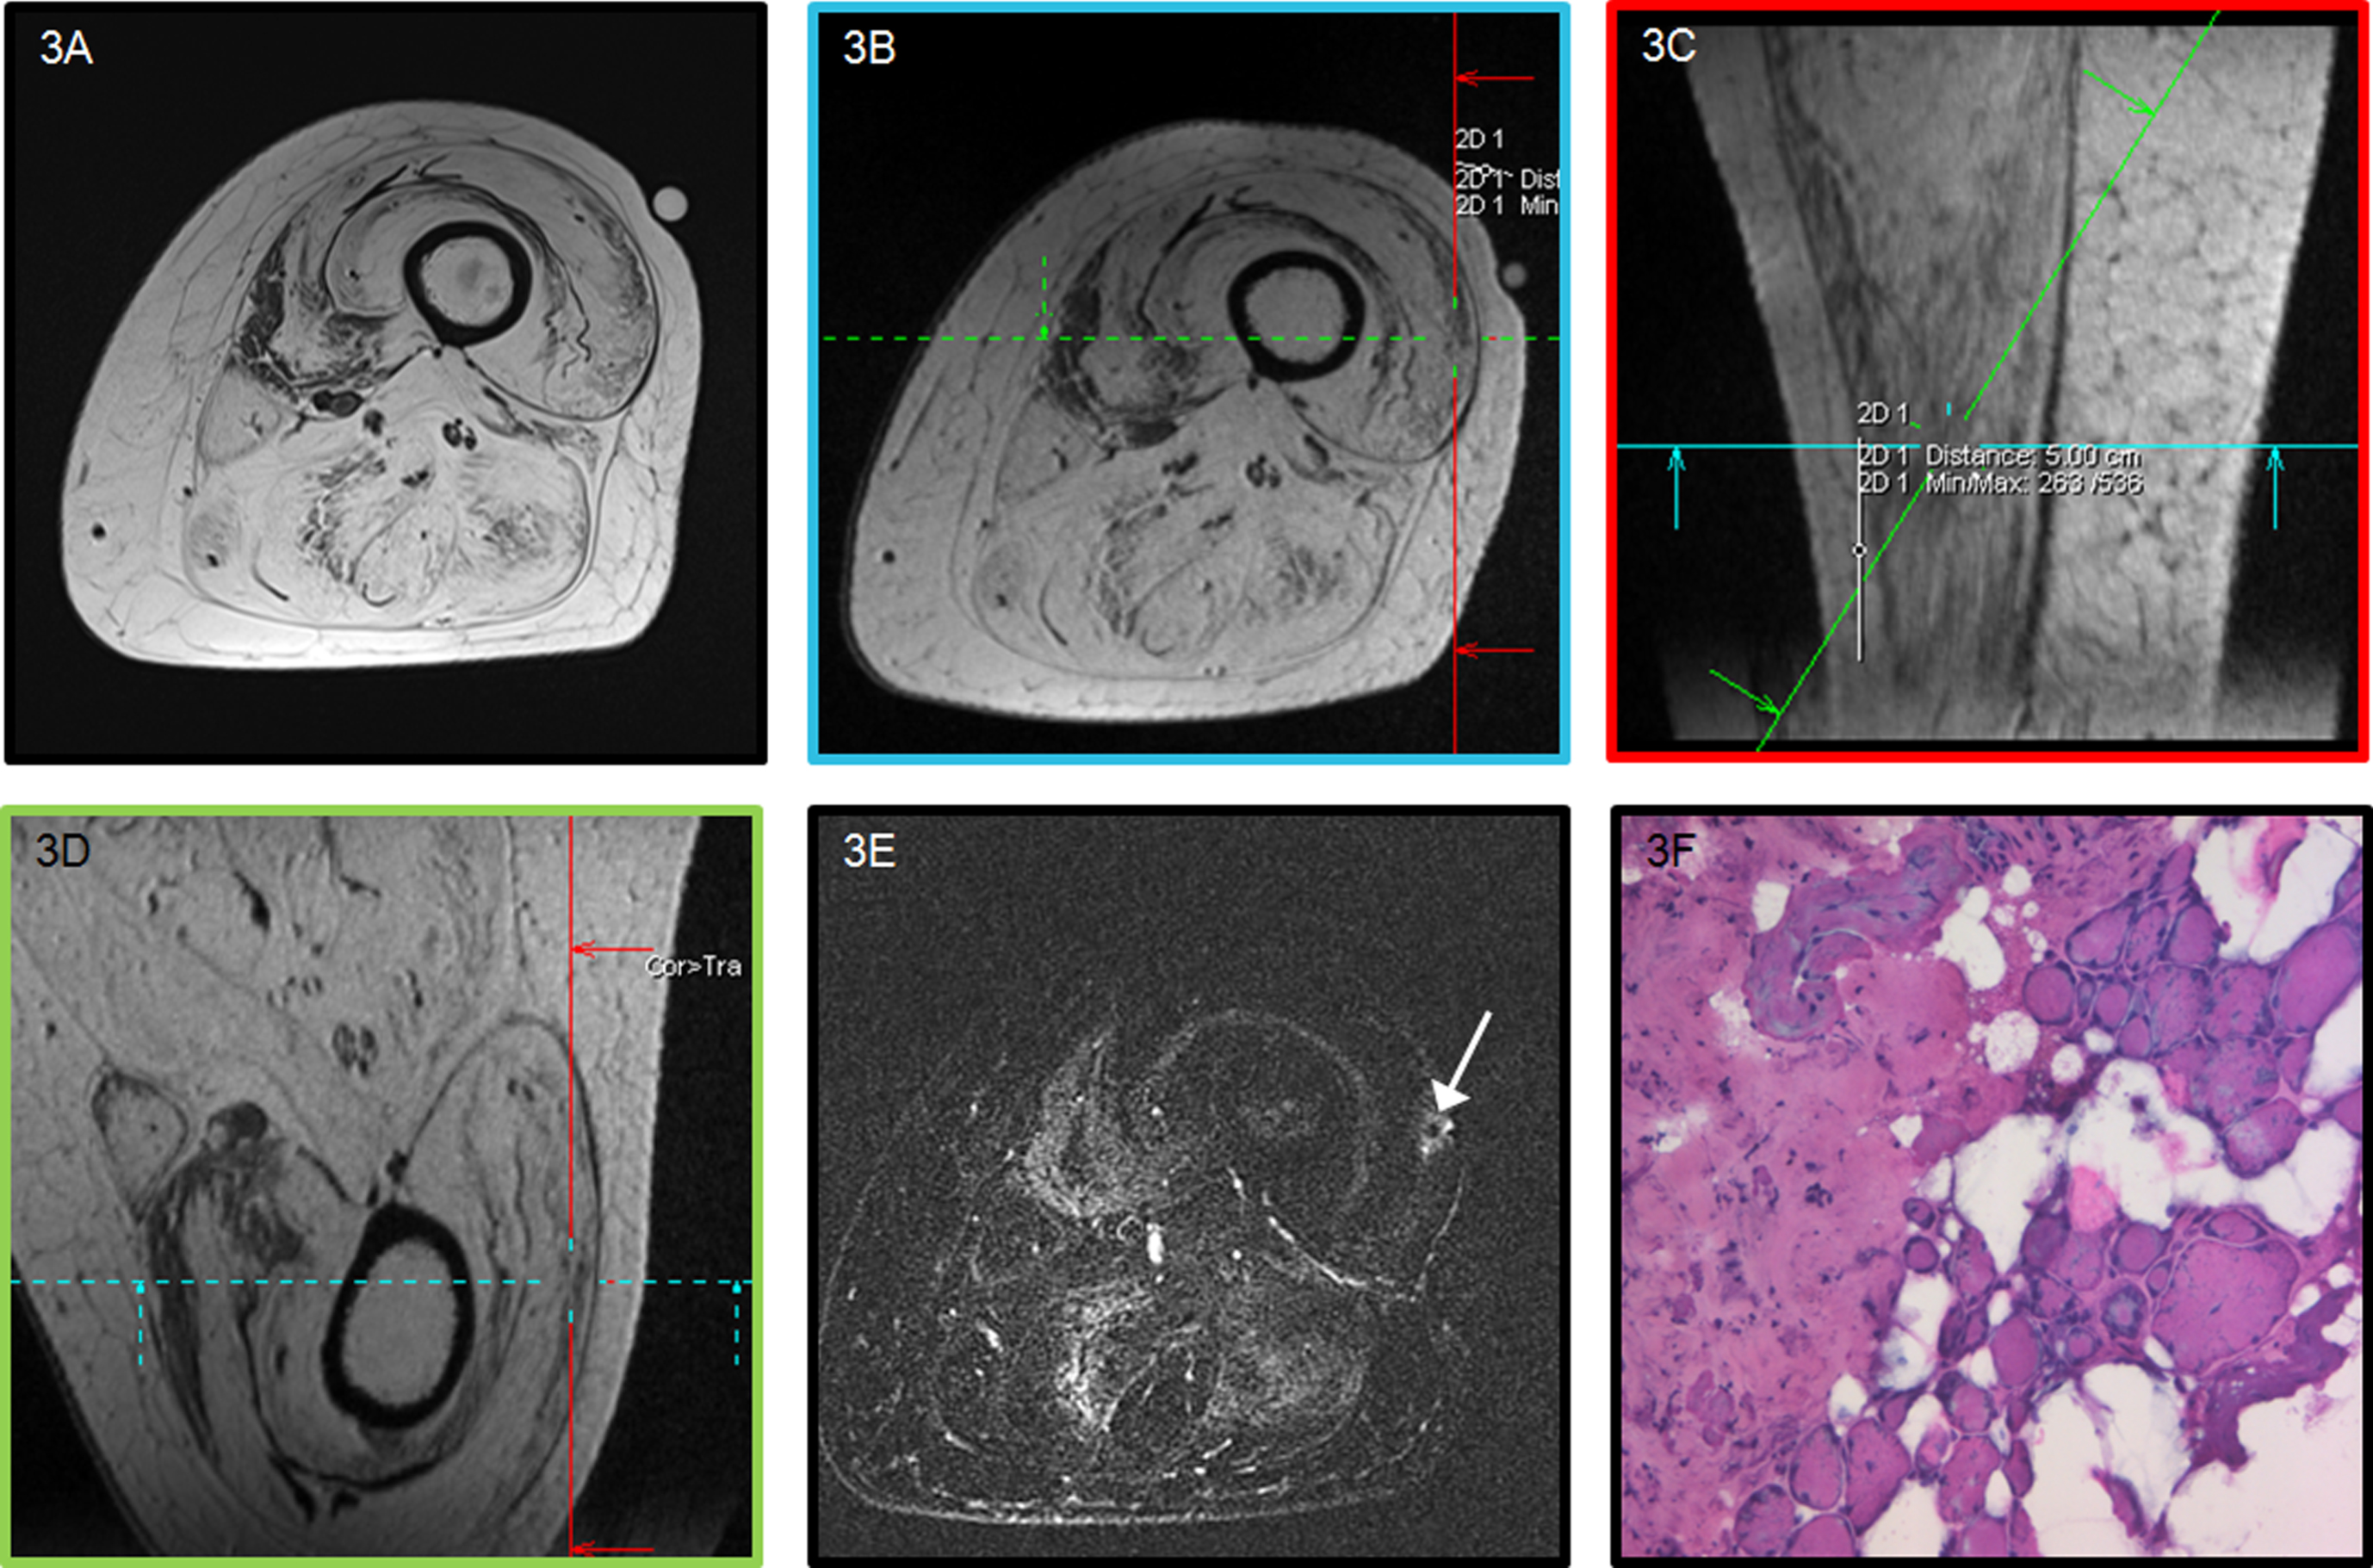 MRI-guided muscle biopsy in a patient with limited residual muscle tissue. (A) Axial T1-weighted axial image of the left upper leg of a 49-year-old female FSHD1 patient showing marked fatty infiltration of all muscles. (B-D) 3D T1 planning images to determine the appropriate needle trajectory to the target site. Colored boxes surrounding the images correspond with colored lines indicating images planes. (E) post-biopsy TIRM image showing the biopsy site (arrow). (F) H-Phlox staining demonstrates severe dystrophic changes as reflected by the marked increase in fiber size variability, increased internal nuclei, fibrosis, and fatty infiltration.